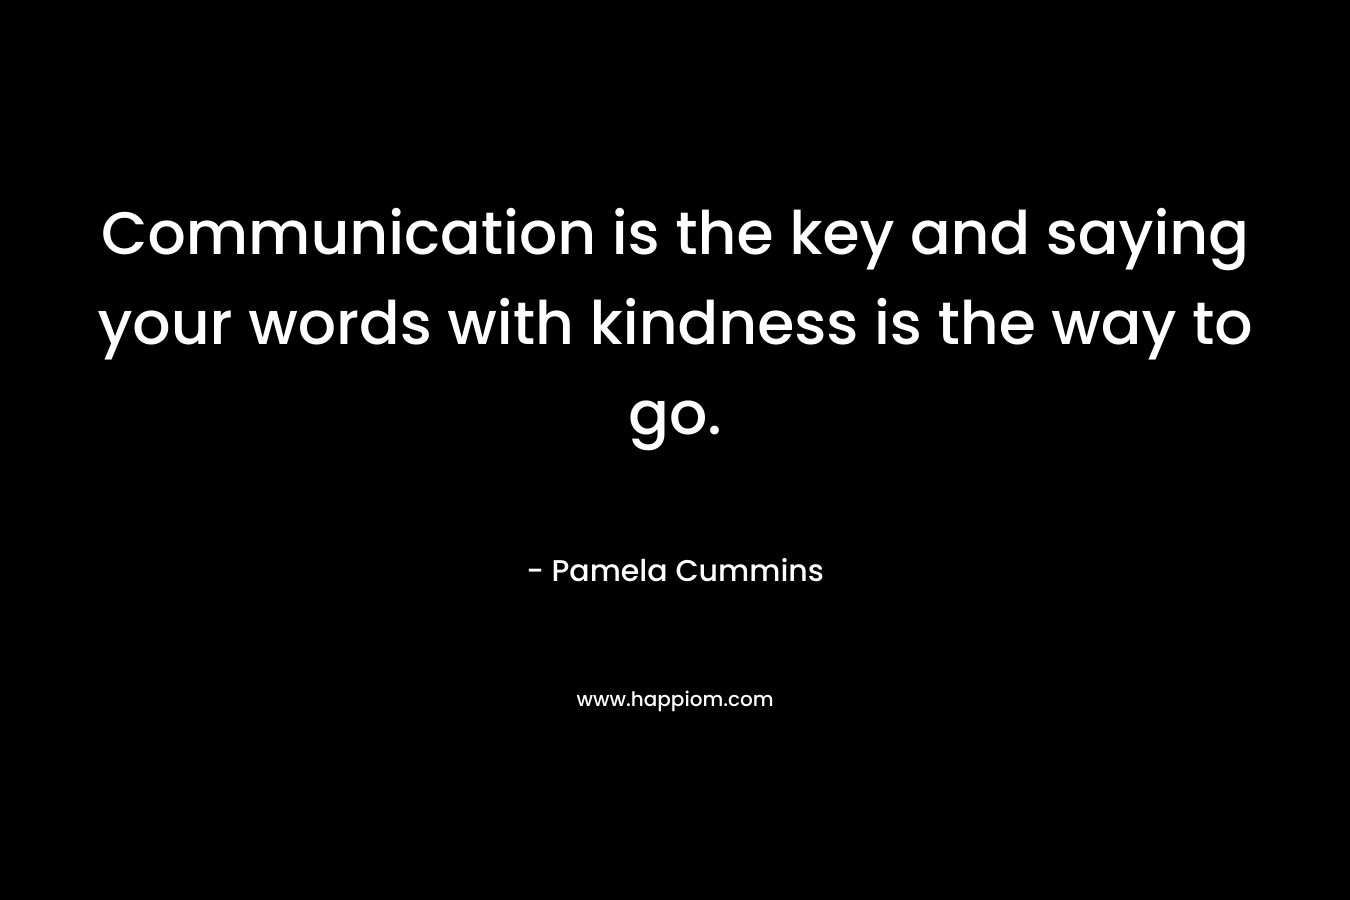 Communication is the key and saying your words with kindness is the way to go.